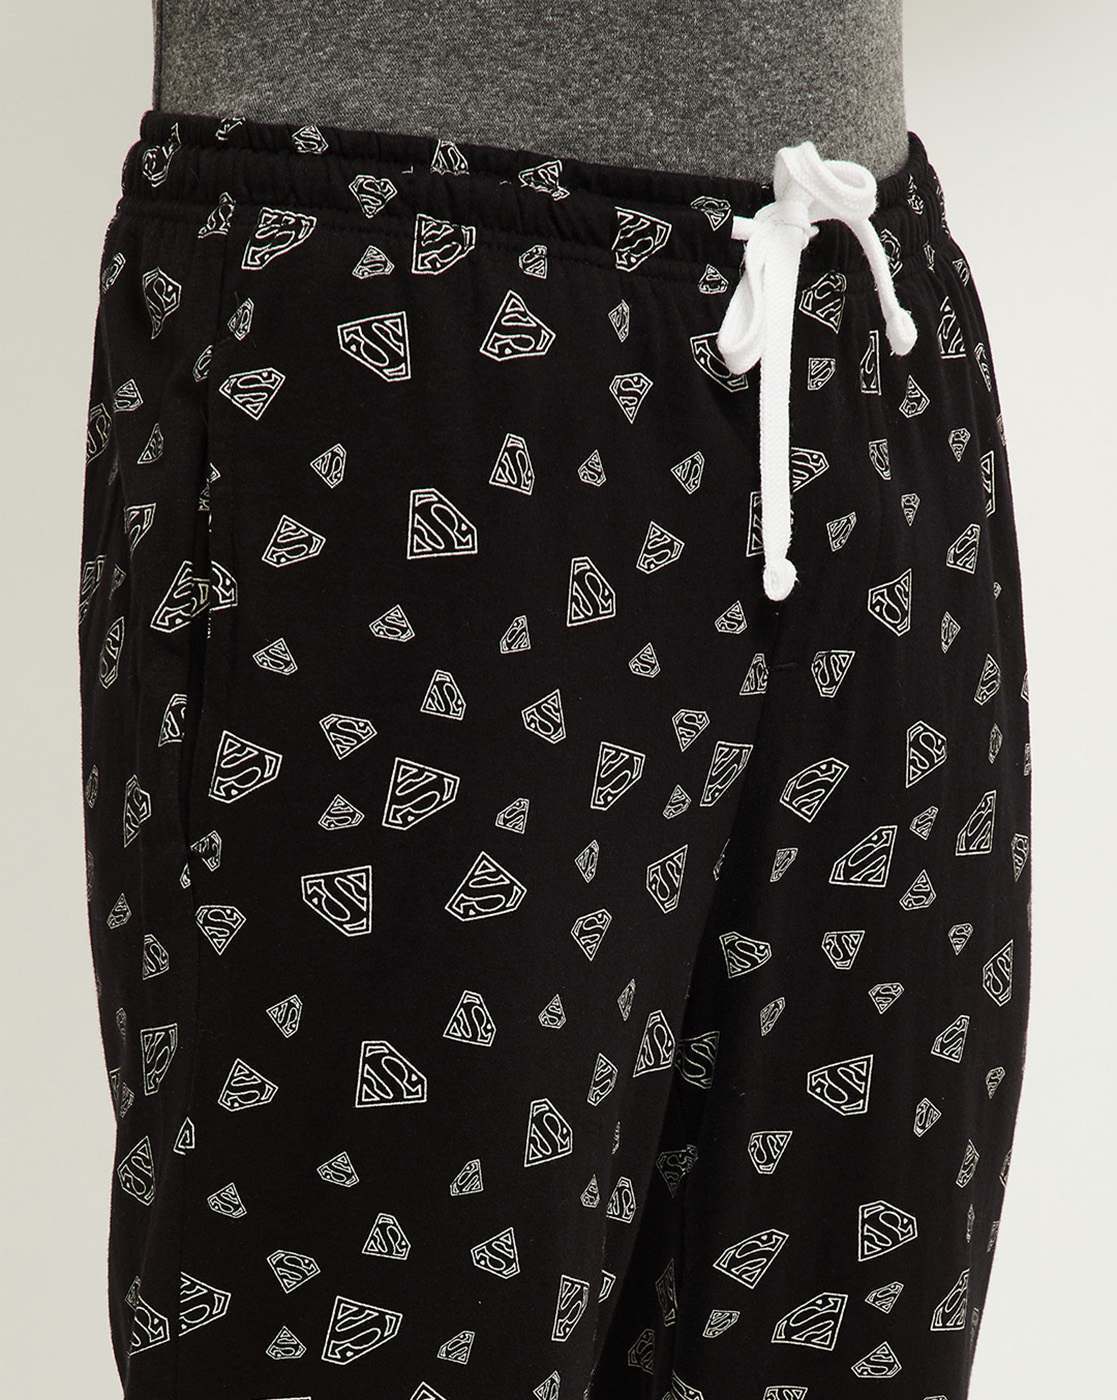 SONOMA life + style 100% Cotton Polka Dots Black Casual Pants Size XL - 74%  off